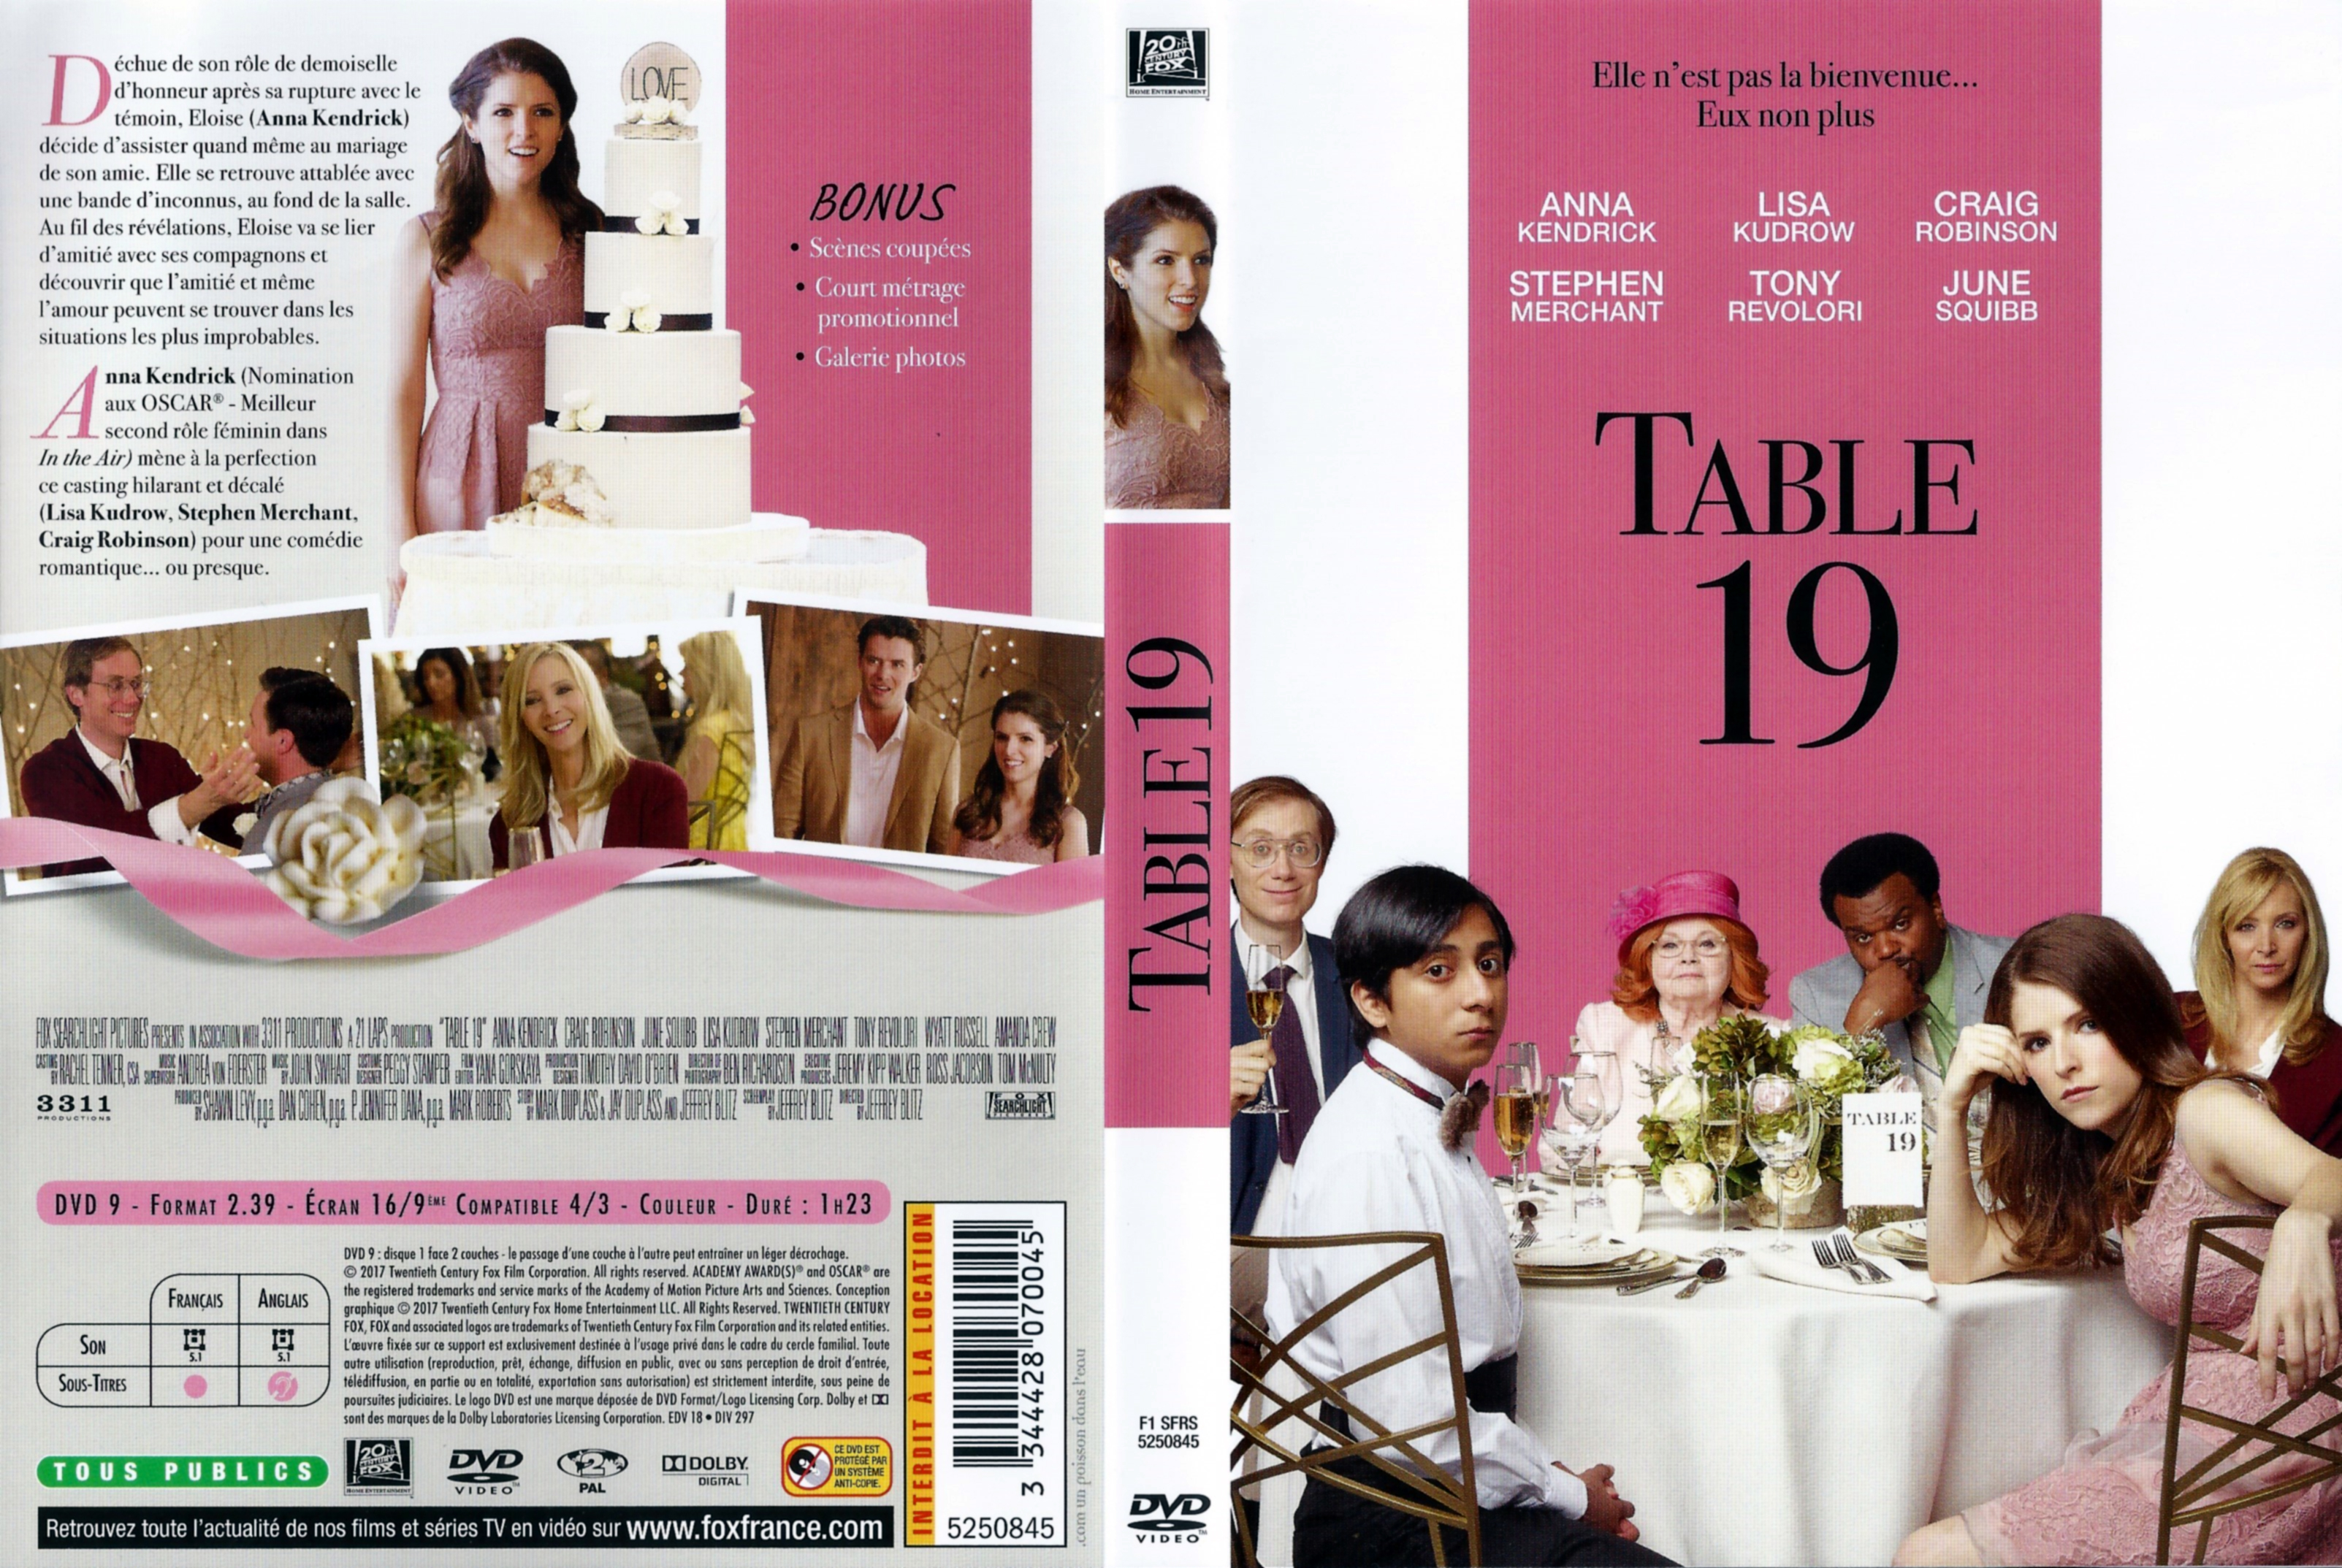 Jaquette DVD Table 19